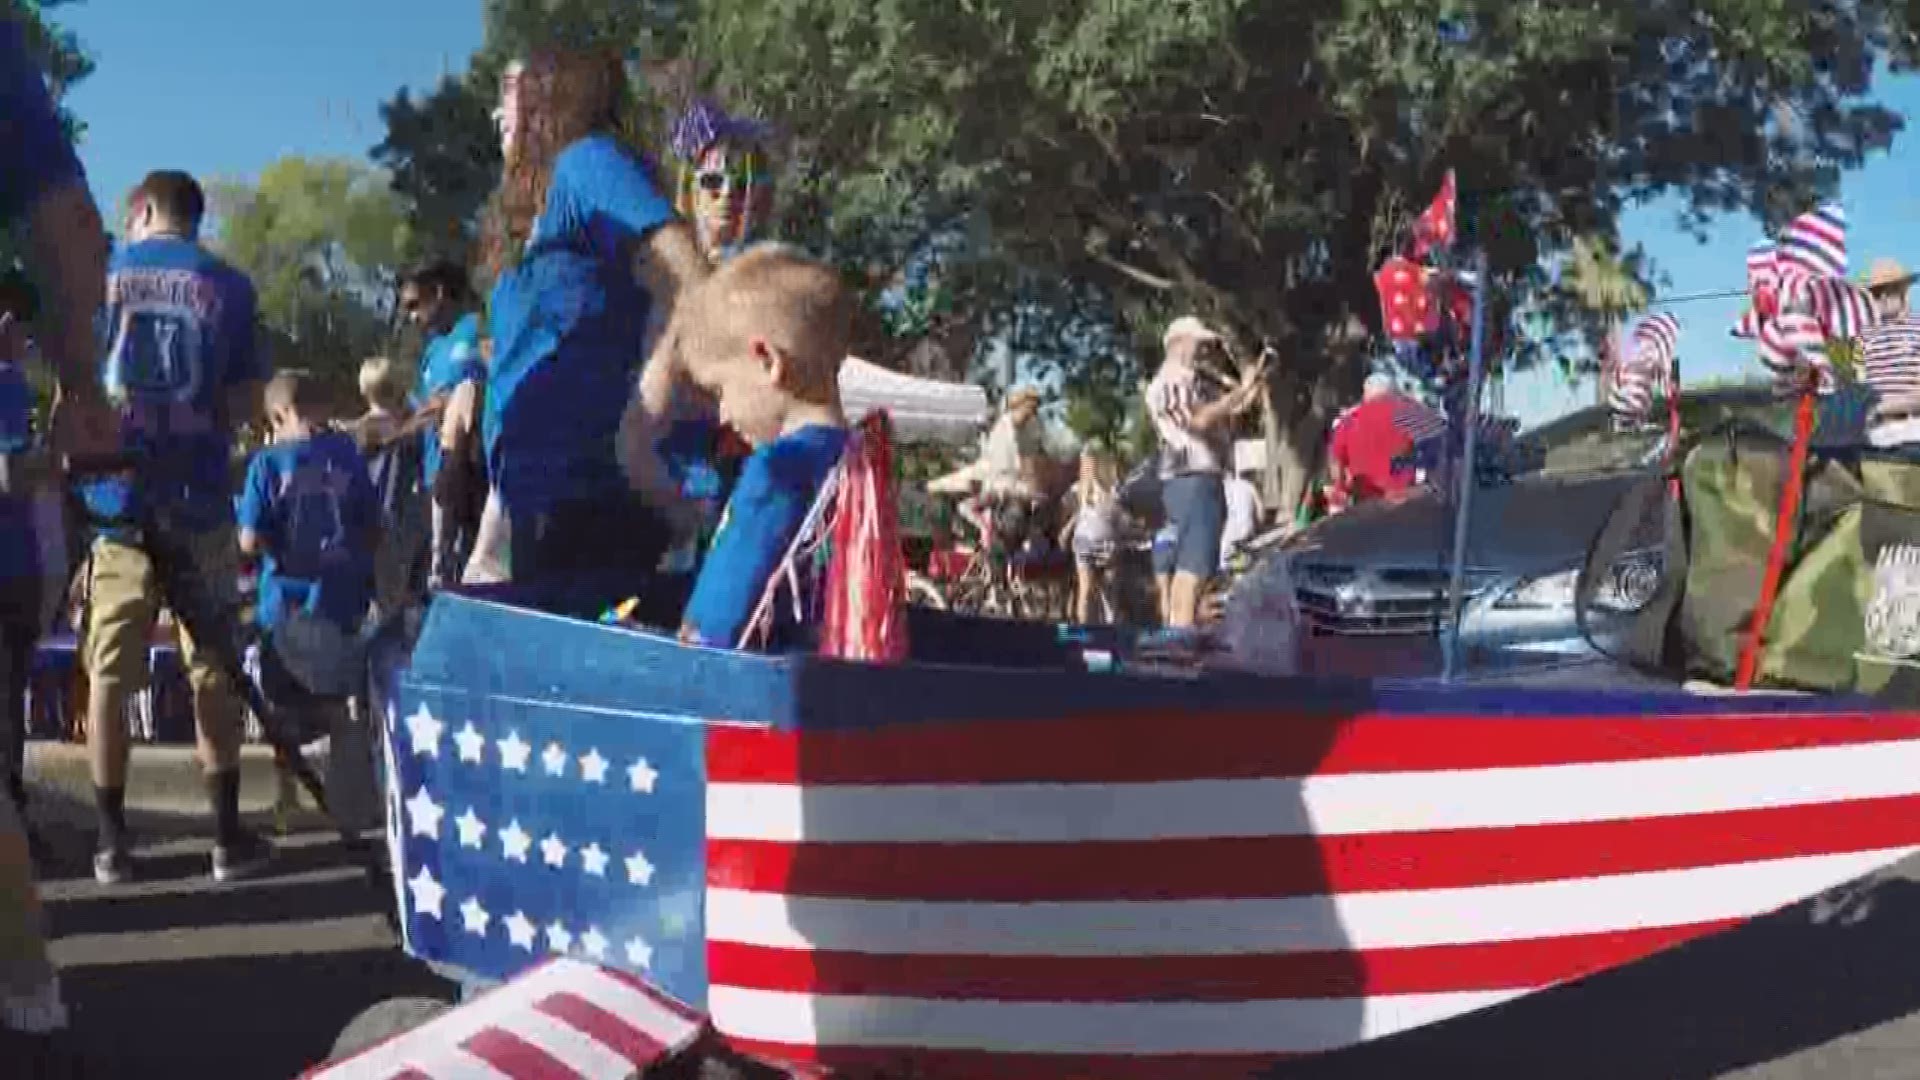 The Royal Palm's neighborhood sticks with tradition as they celebrate their 41st annual 4th of July parade.